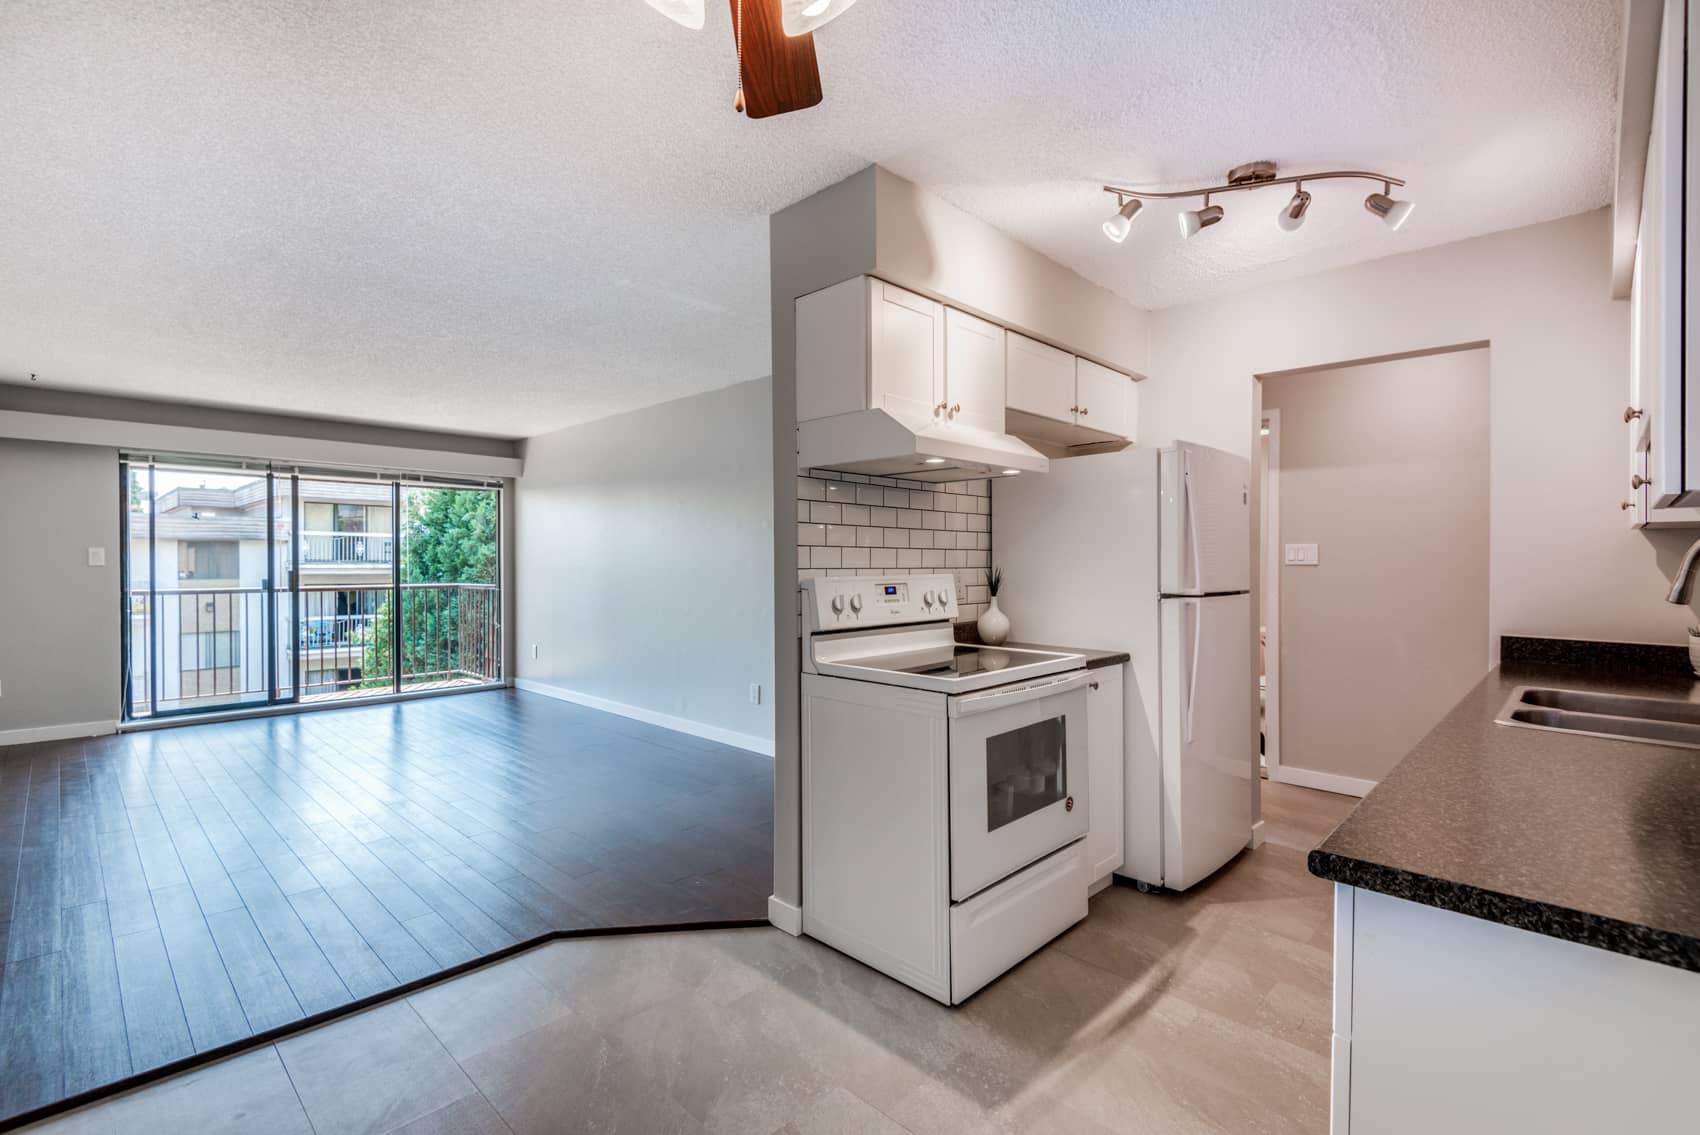 1 Bed Condo in Sapperton, New Westminster